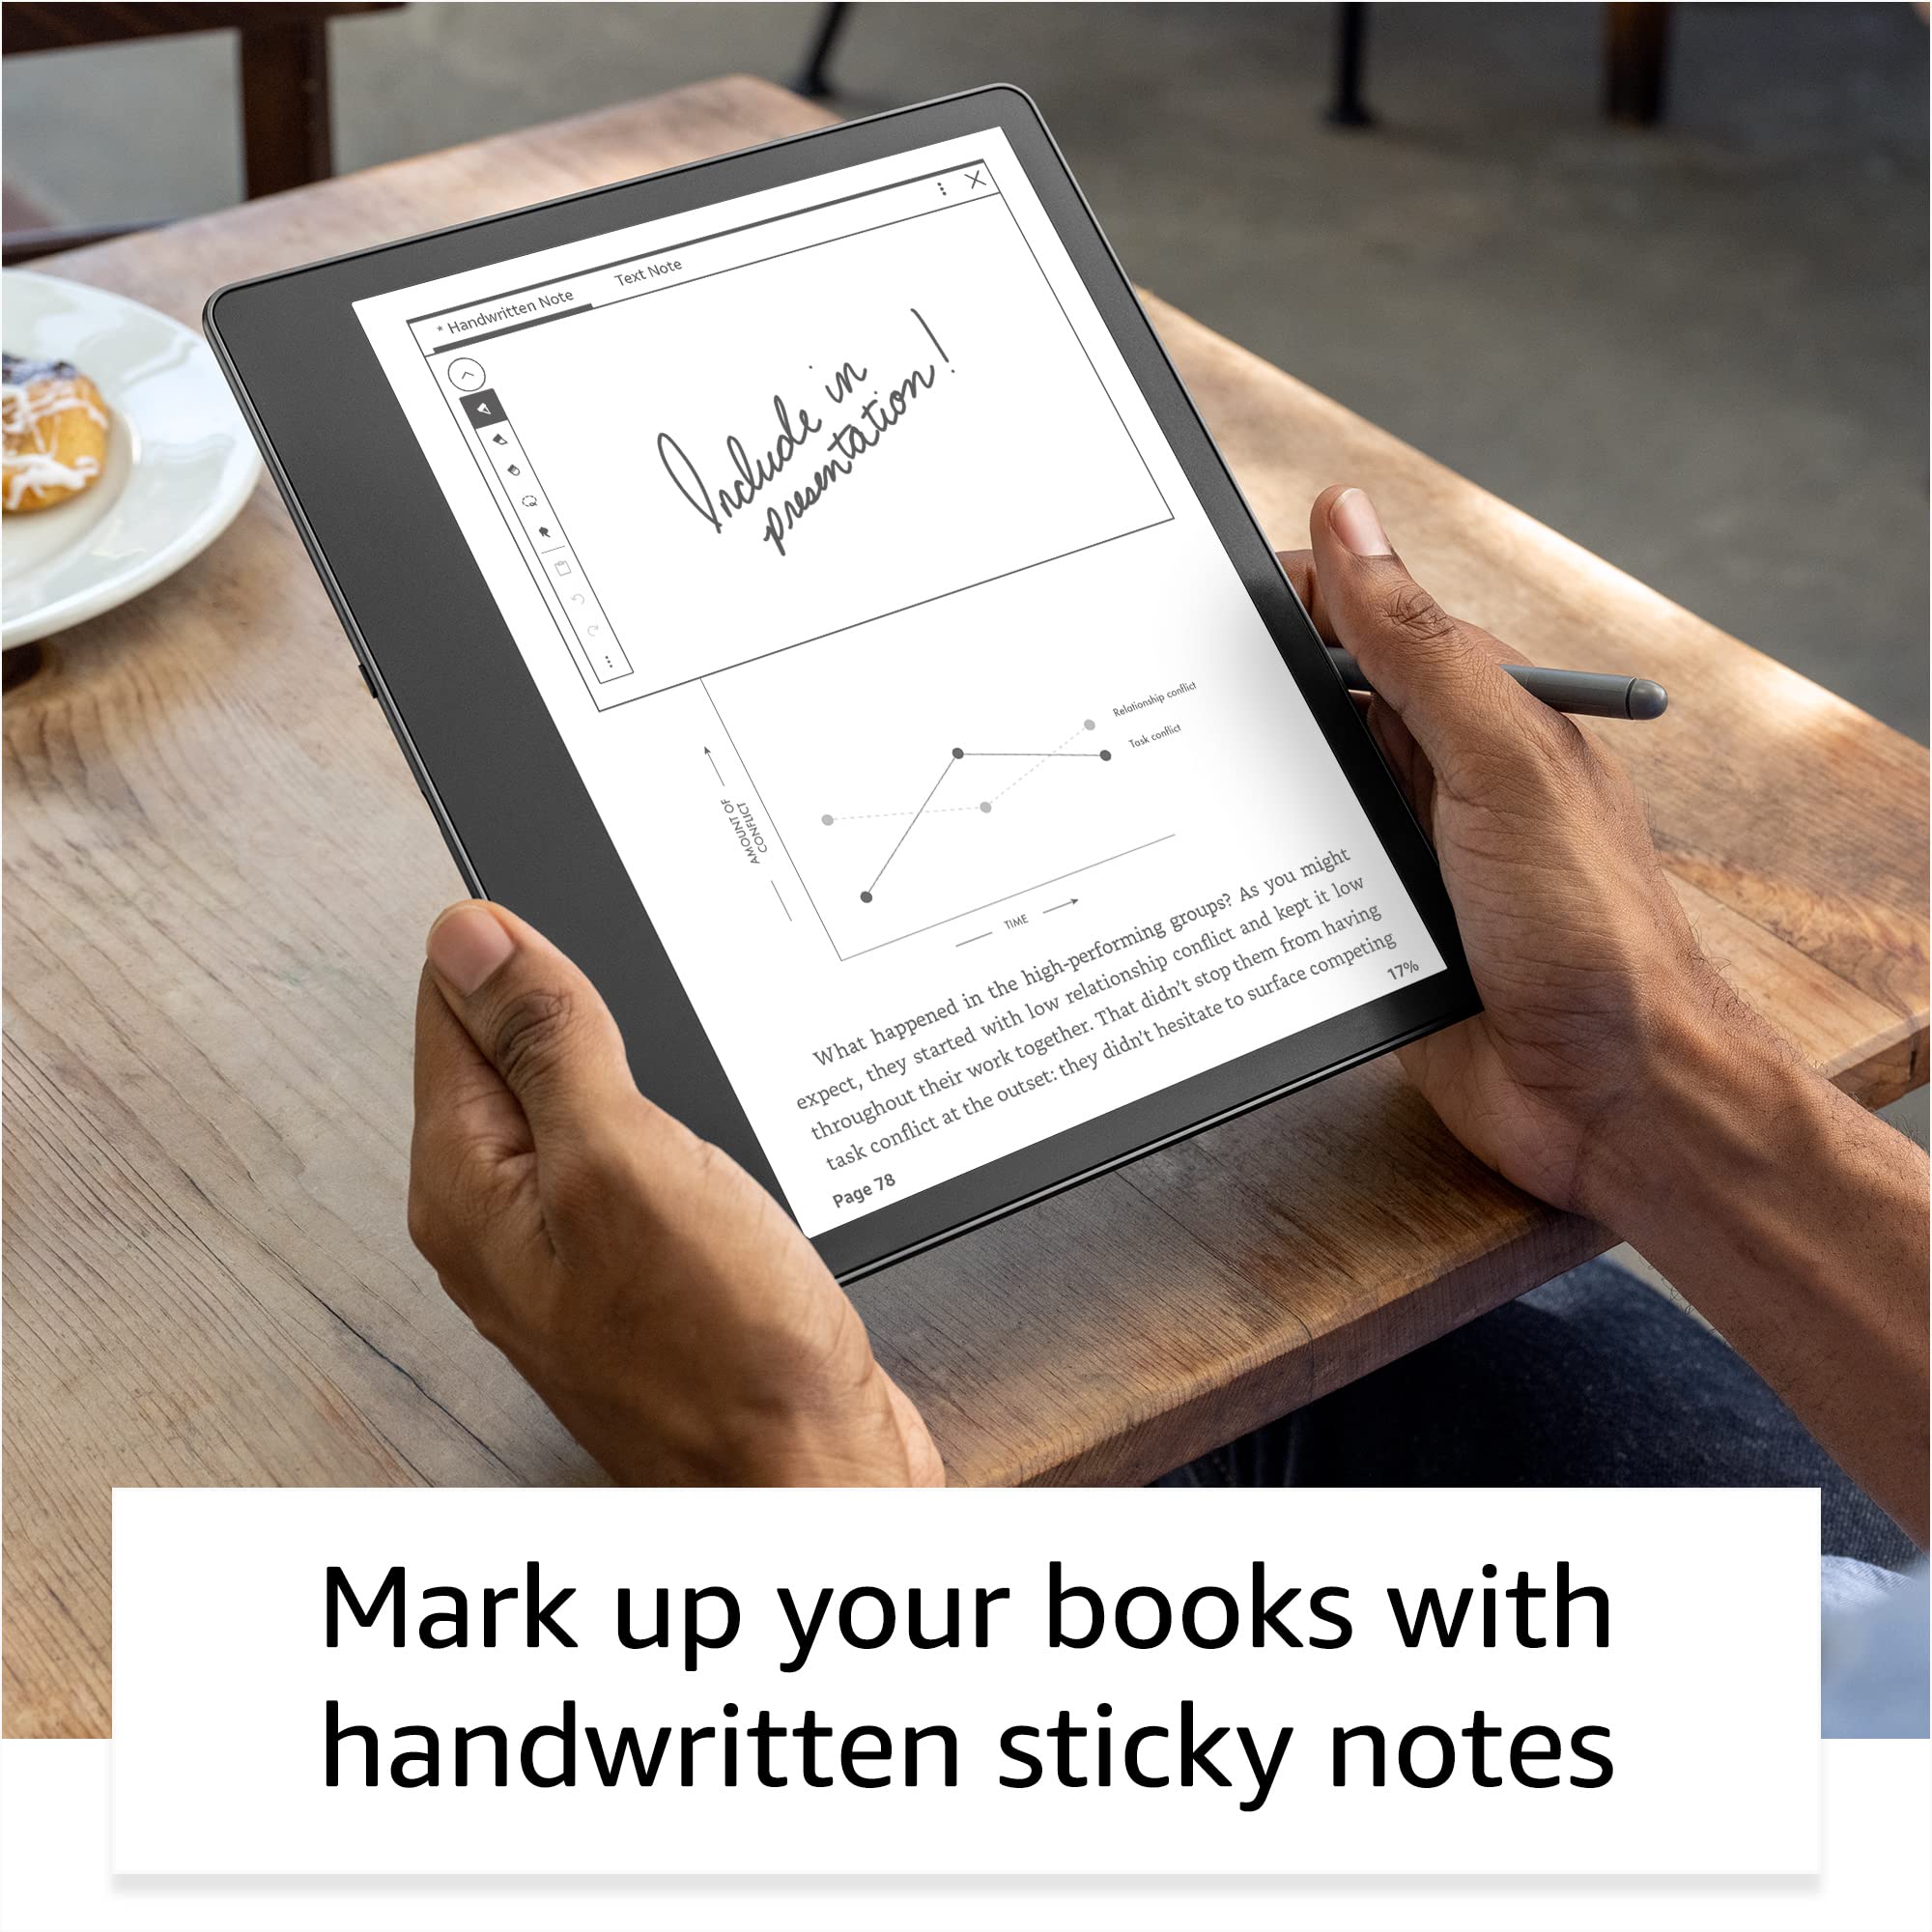 Kindle Scribe (64 GB) the first Kindle for reading, writing, journaling and sketching - with a 10.2” 300 ppi Paperwhite display, includes Premium Pen